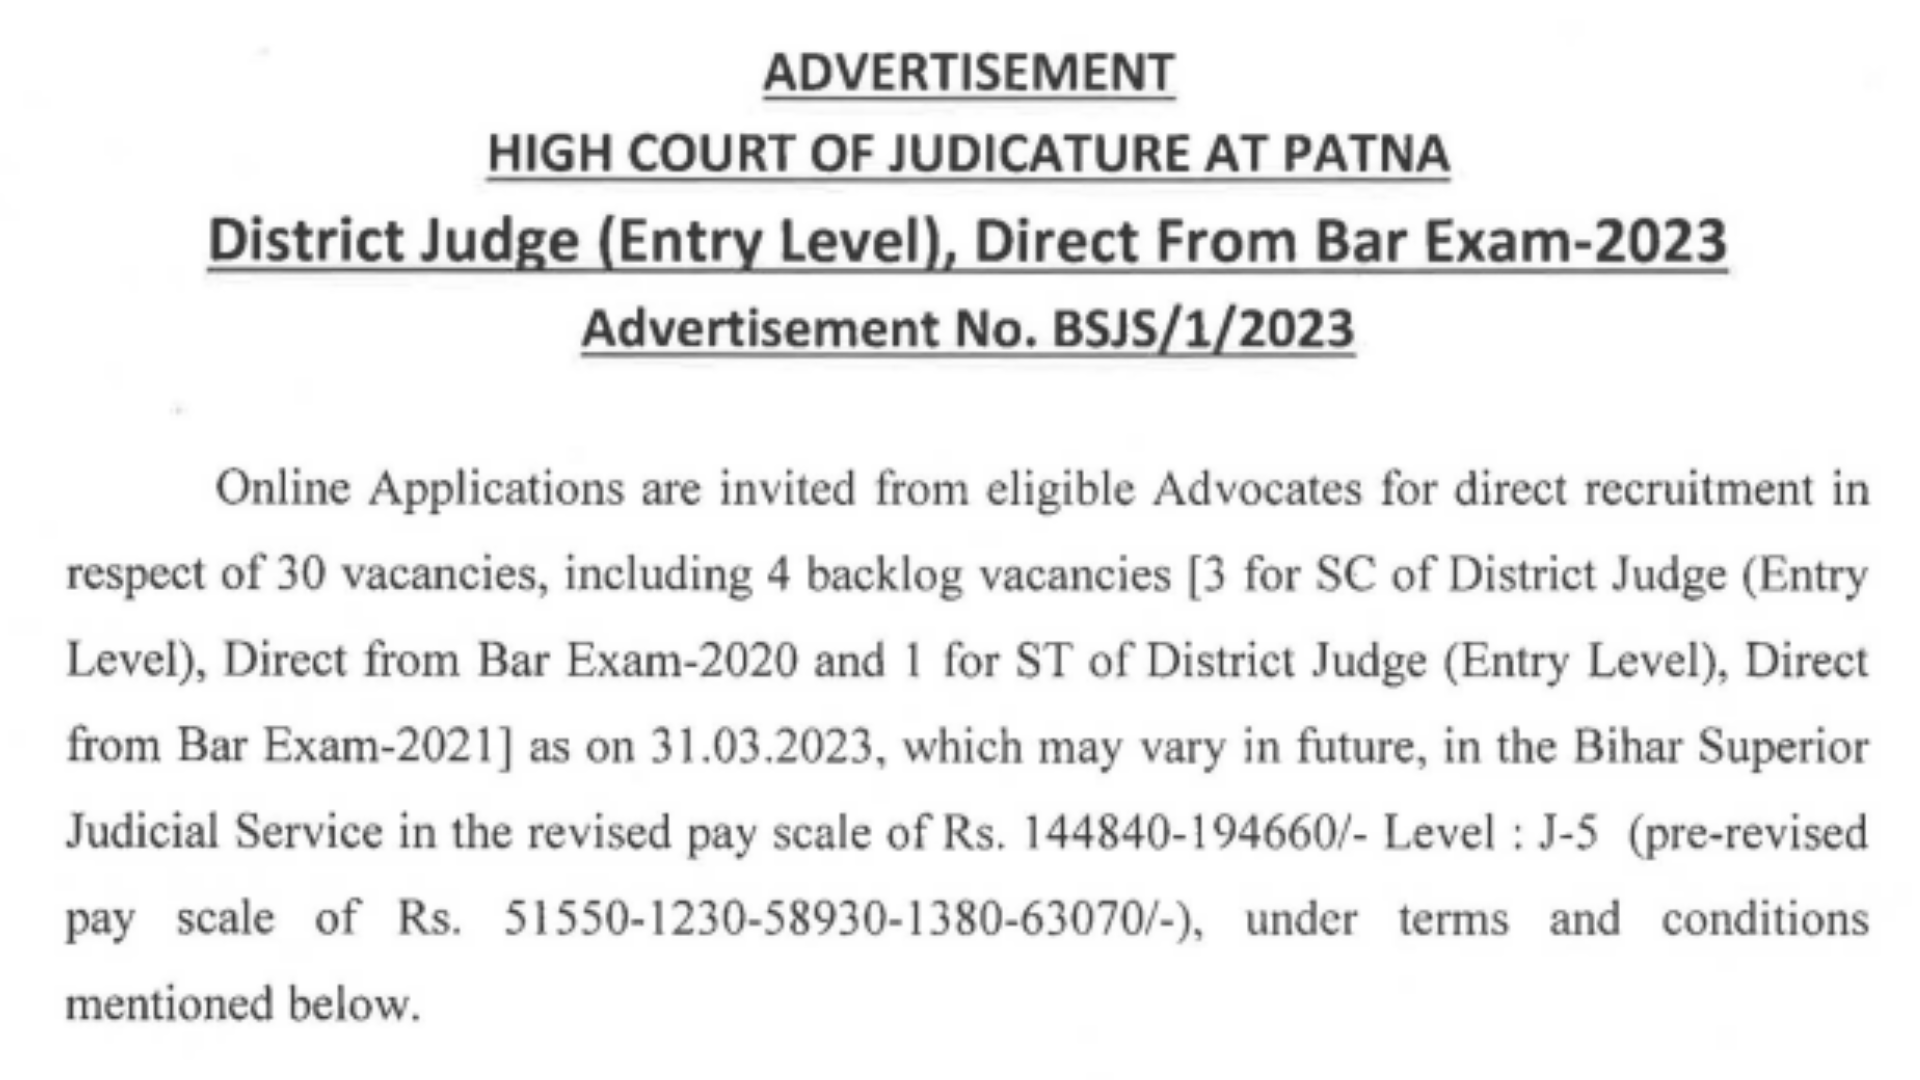 Patna High Court District Judge Recruitment 2023 Apply Online for 30 Post